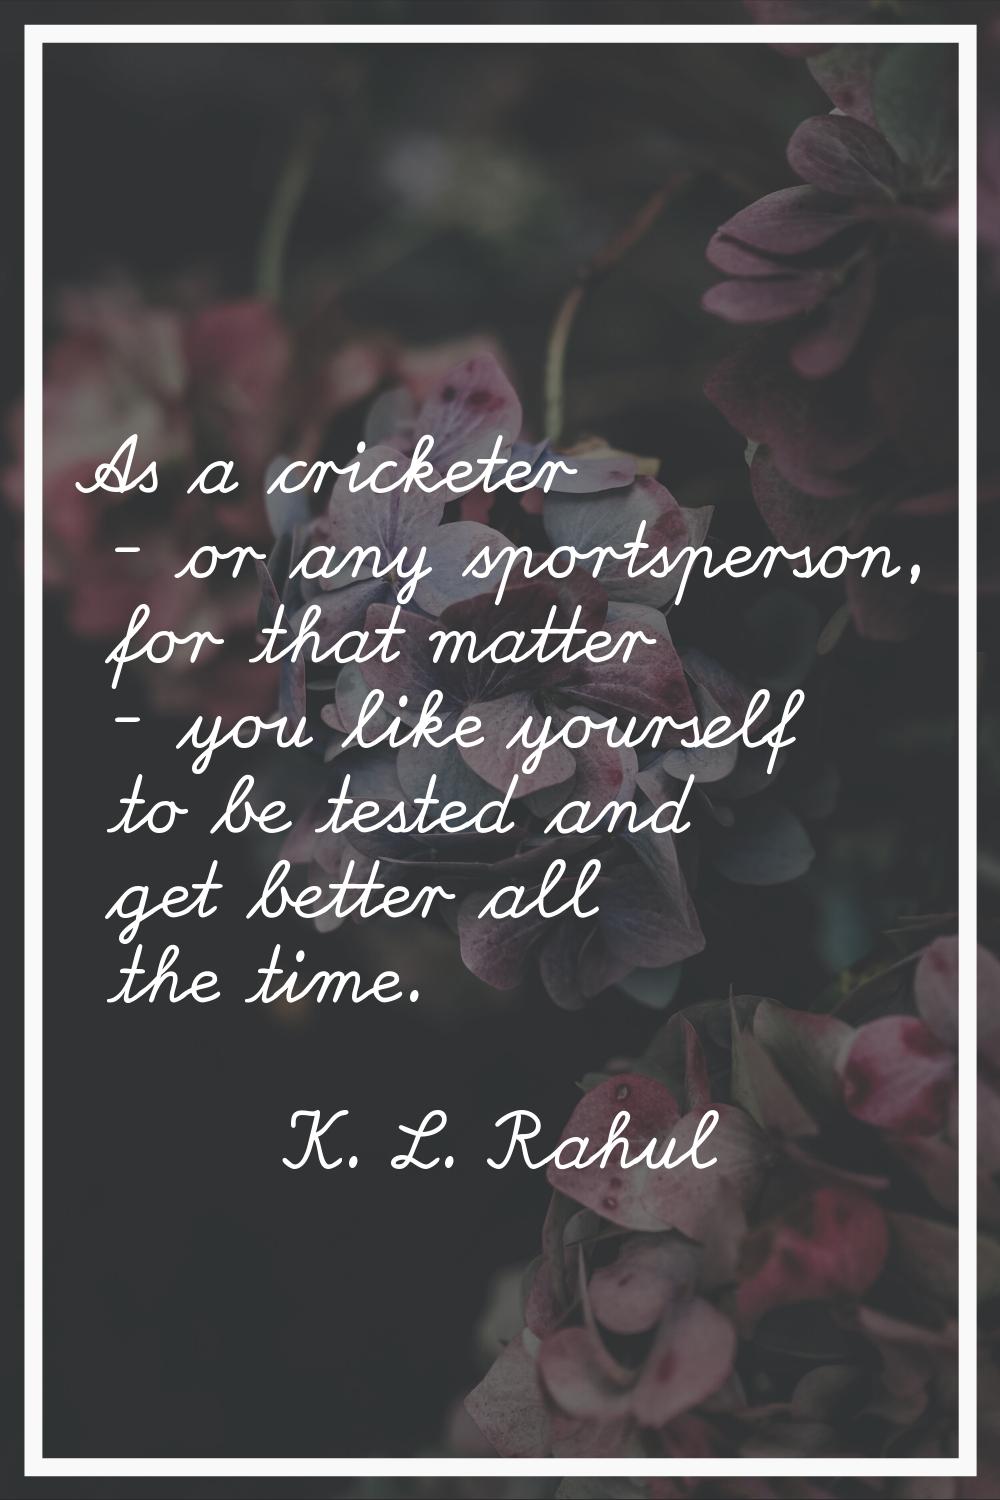 As a cricketer - or any sportsperson, for that matter - you like yourself to be tested and get bett